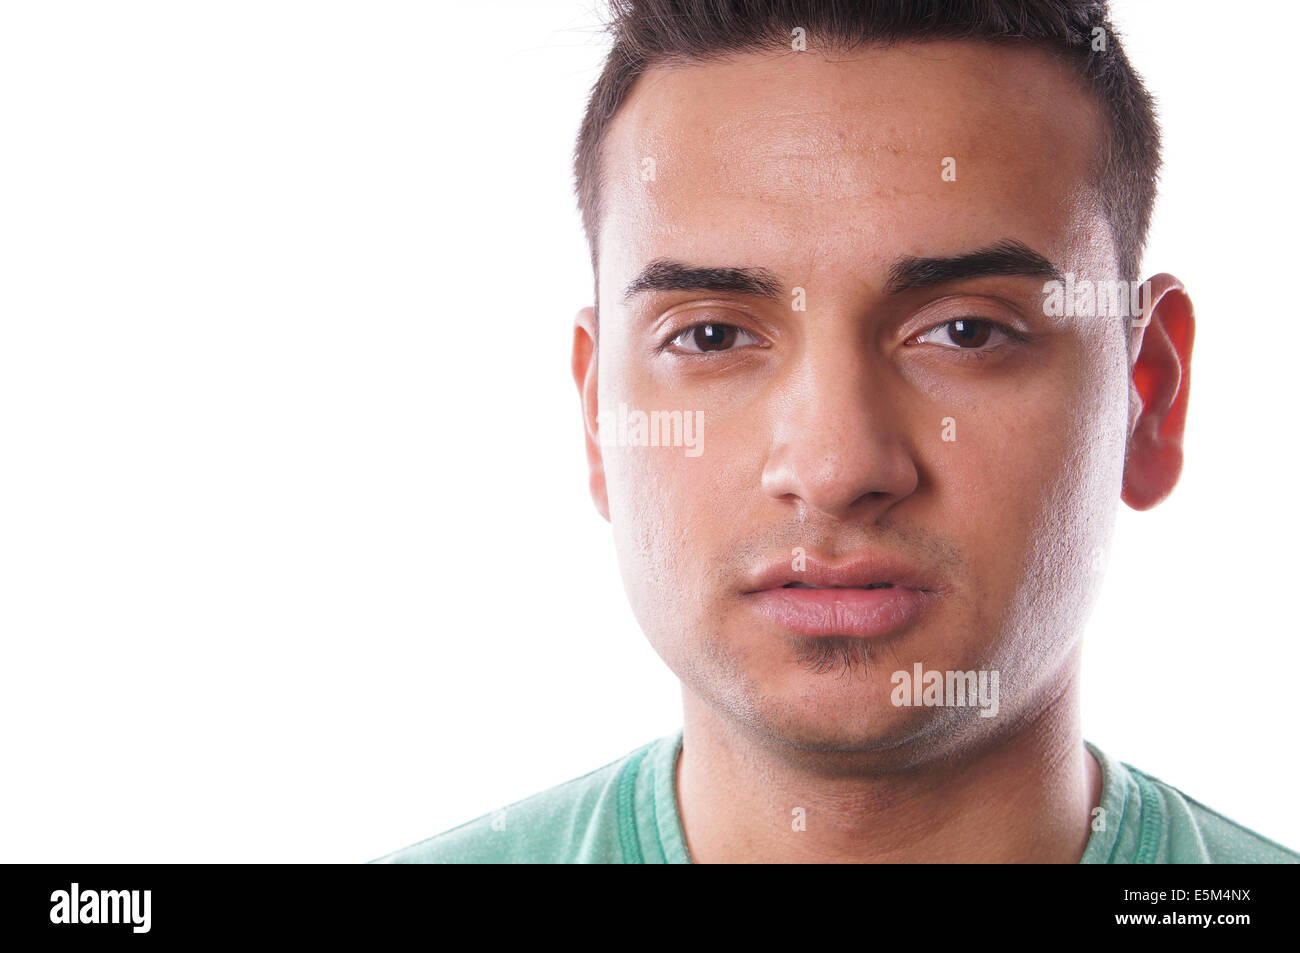 close-up portrait of a young turkish man Stock Photo